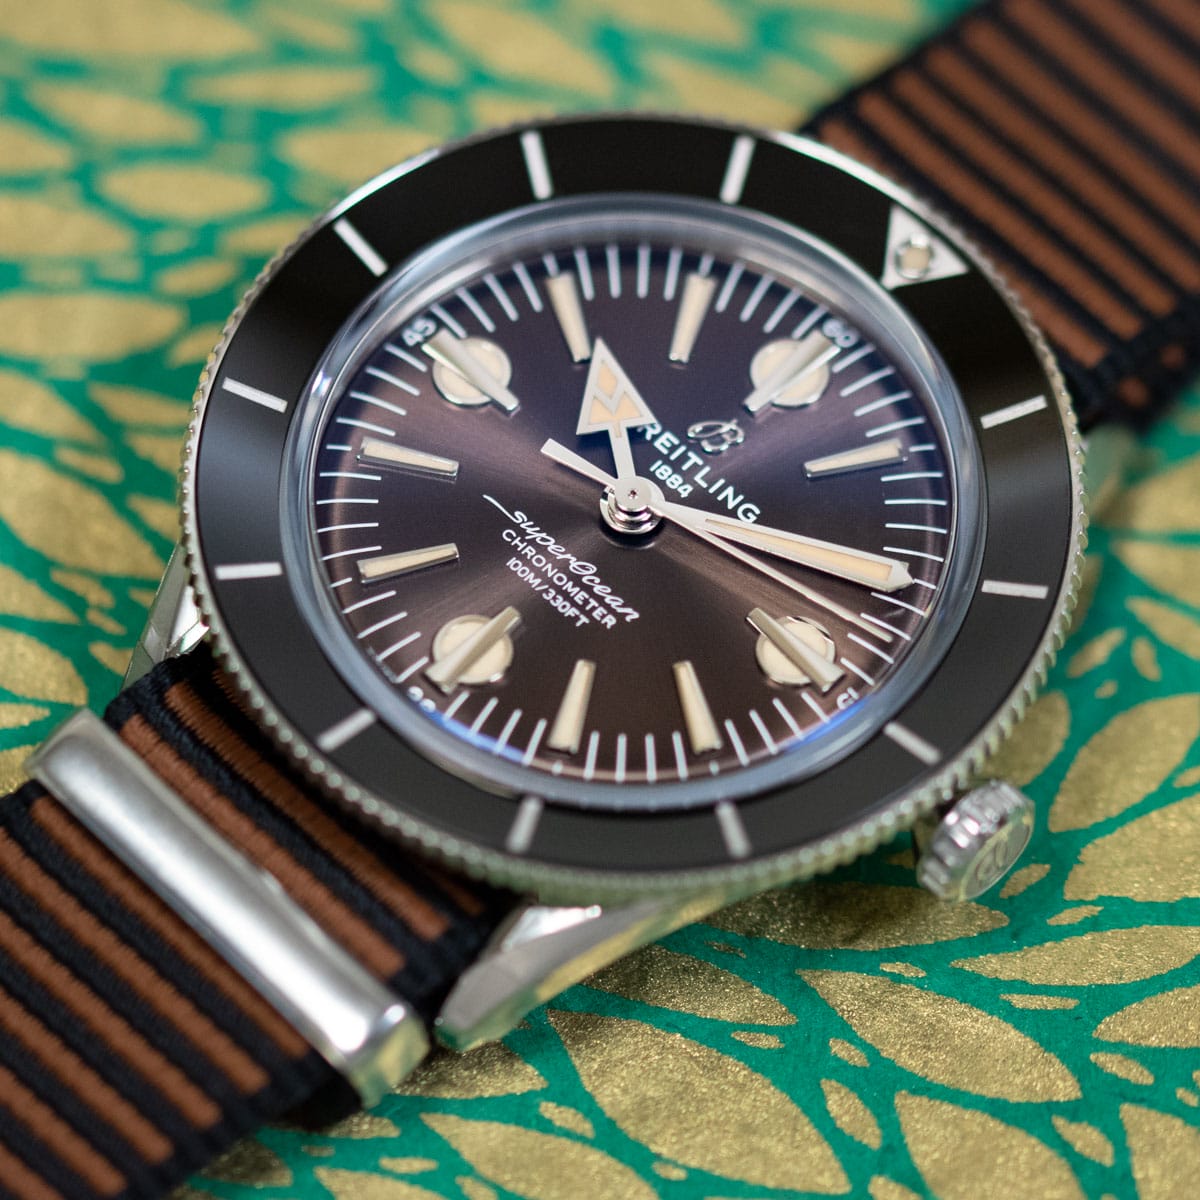 Extra Shot of SuperOcean Heritage '57 Outerknown